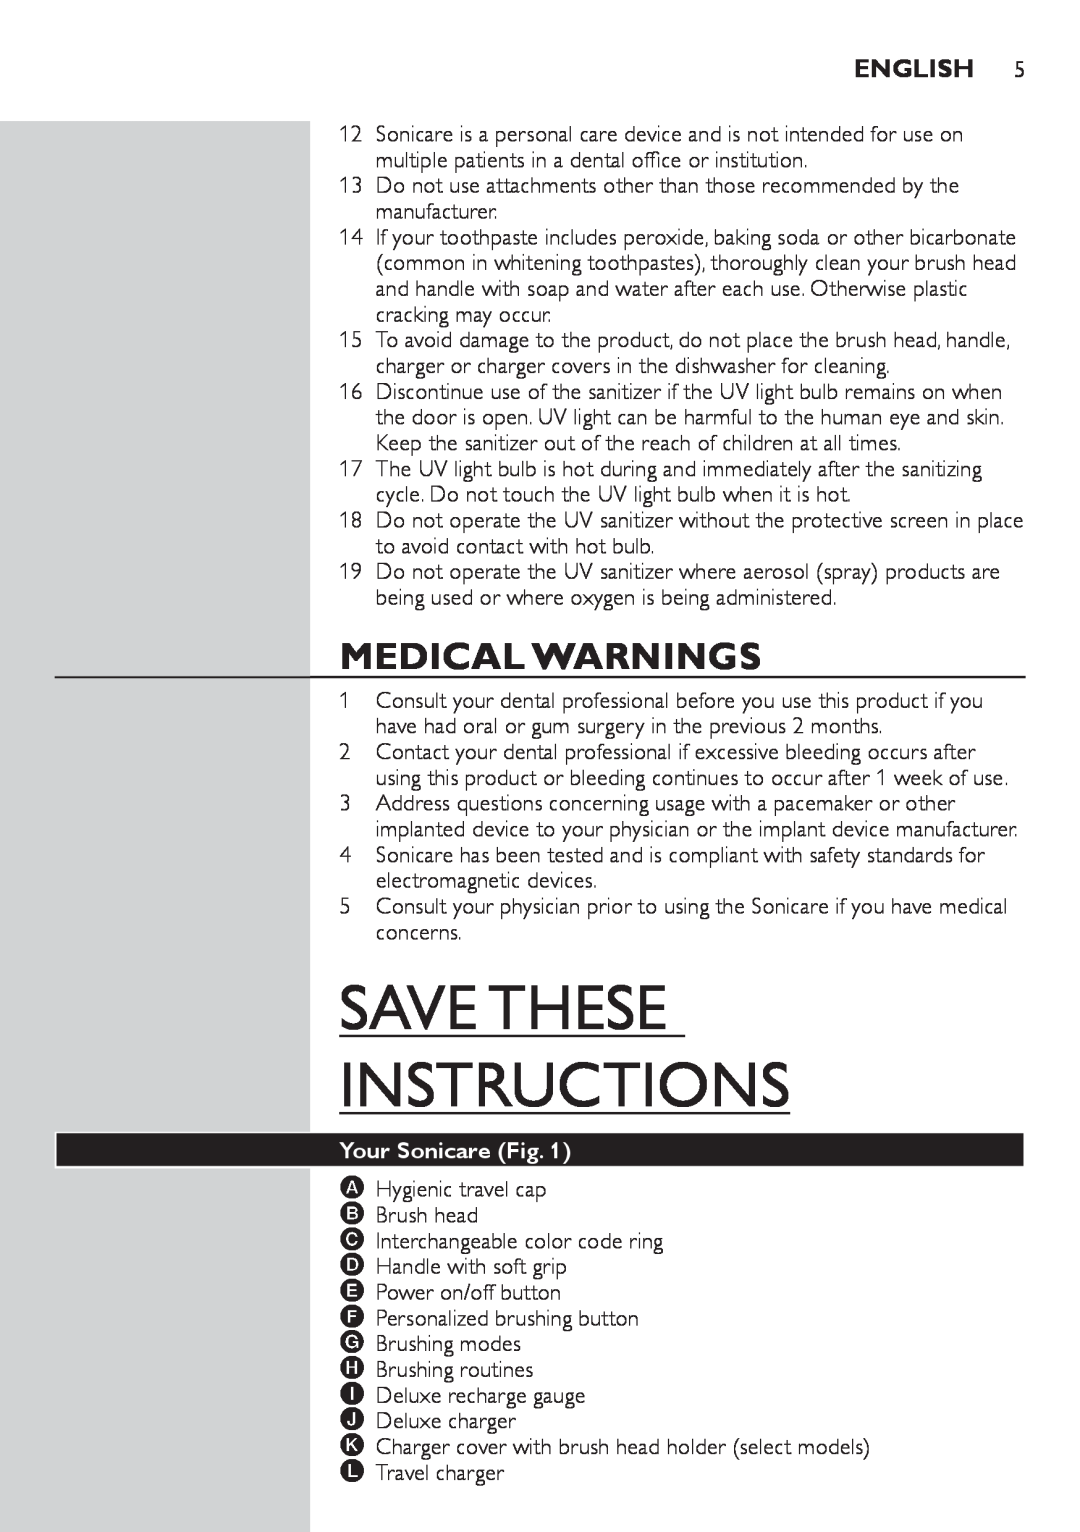 Philips 900 Series manual Medical Warnings, English , Your Sonicare Fig, Save These Instructions 